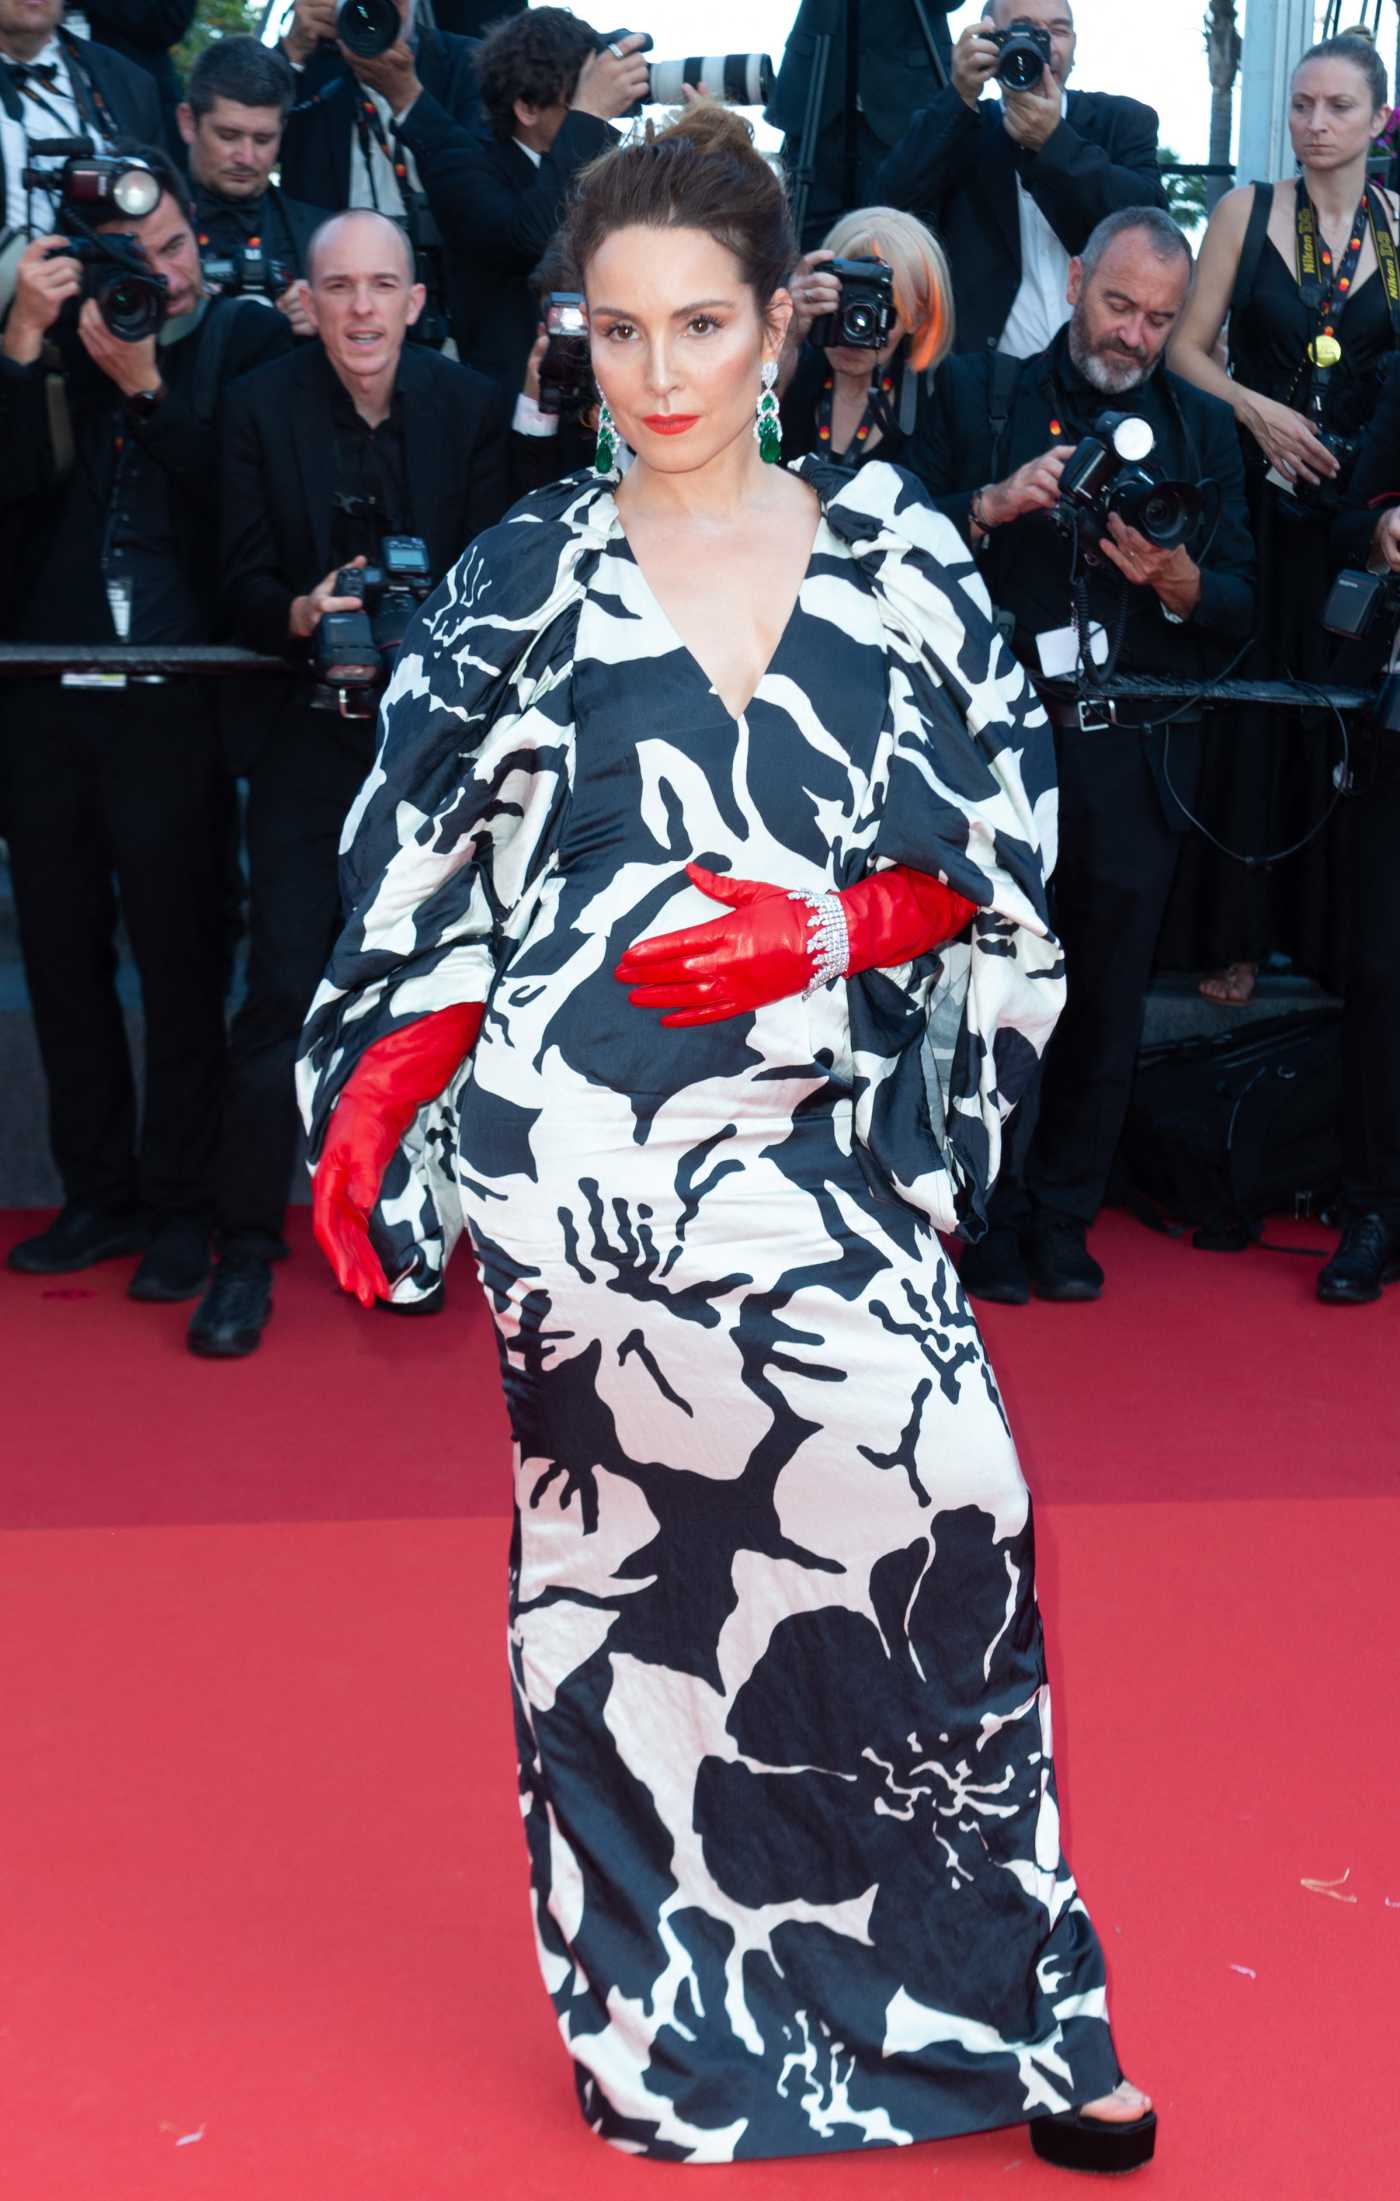 Noomi Rapace Attends the Screening of Elvis During the 75th Annual Cannes Film Festival in Cannes 05/25/2022